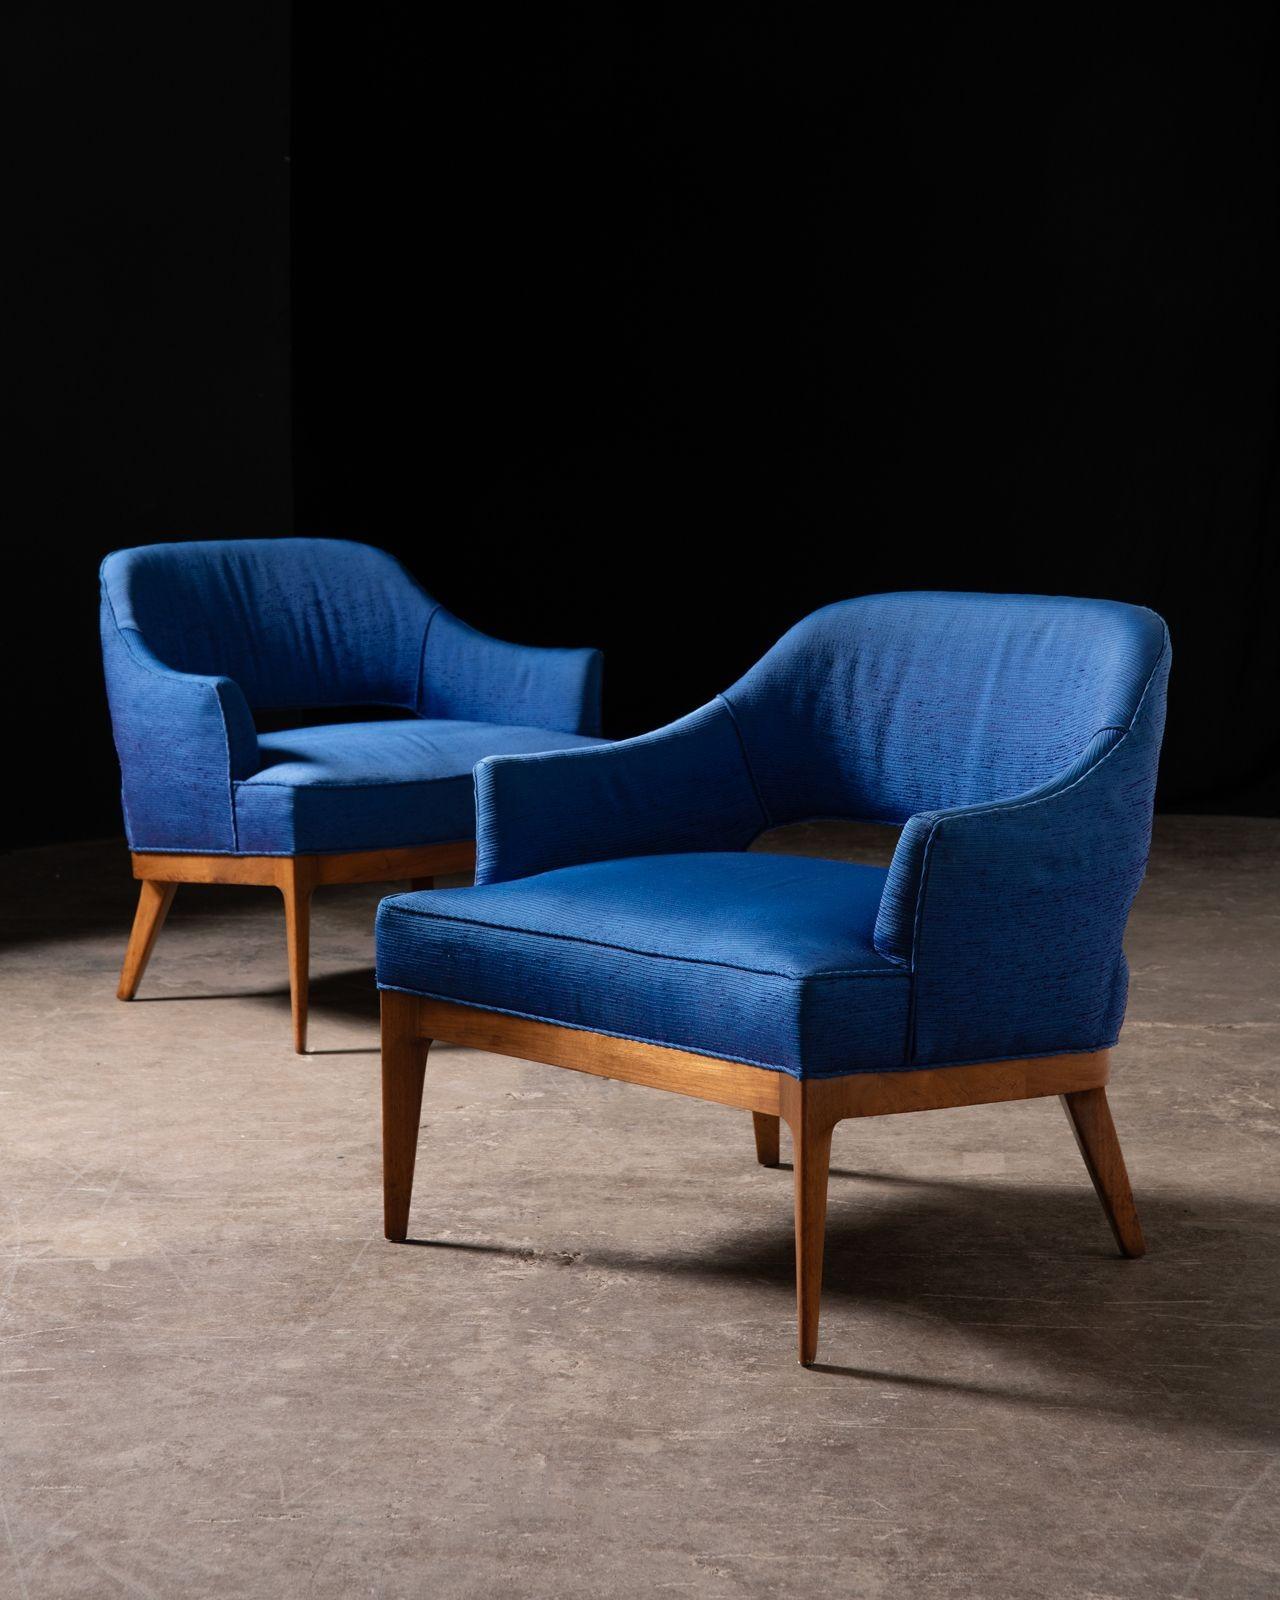 Priced individually but sold only in pairs.
These open back low slung lounge chairs were crafted by the Erwin-Lambeth company and are often mis-attributed to designers Harvey Probber and Edward Wormley. Erwin-Lambeth produced high end mid-century